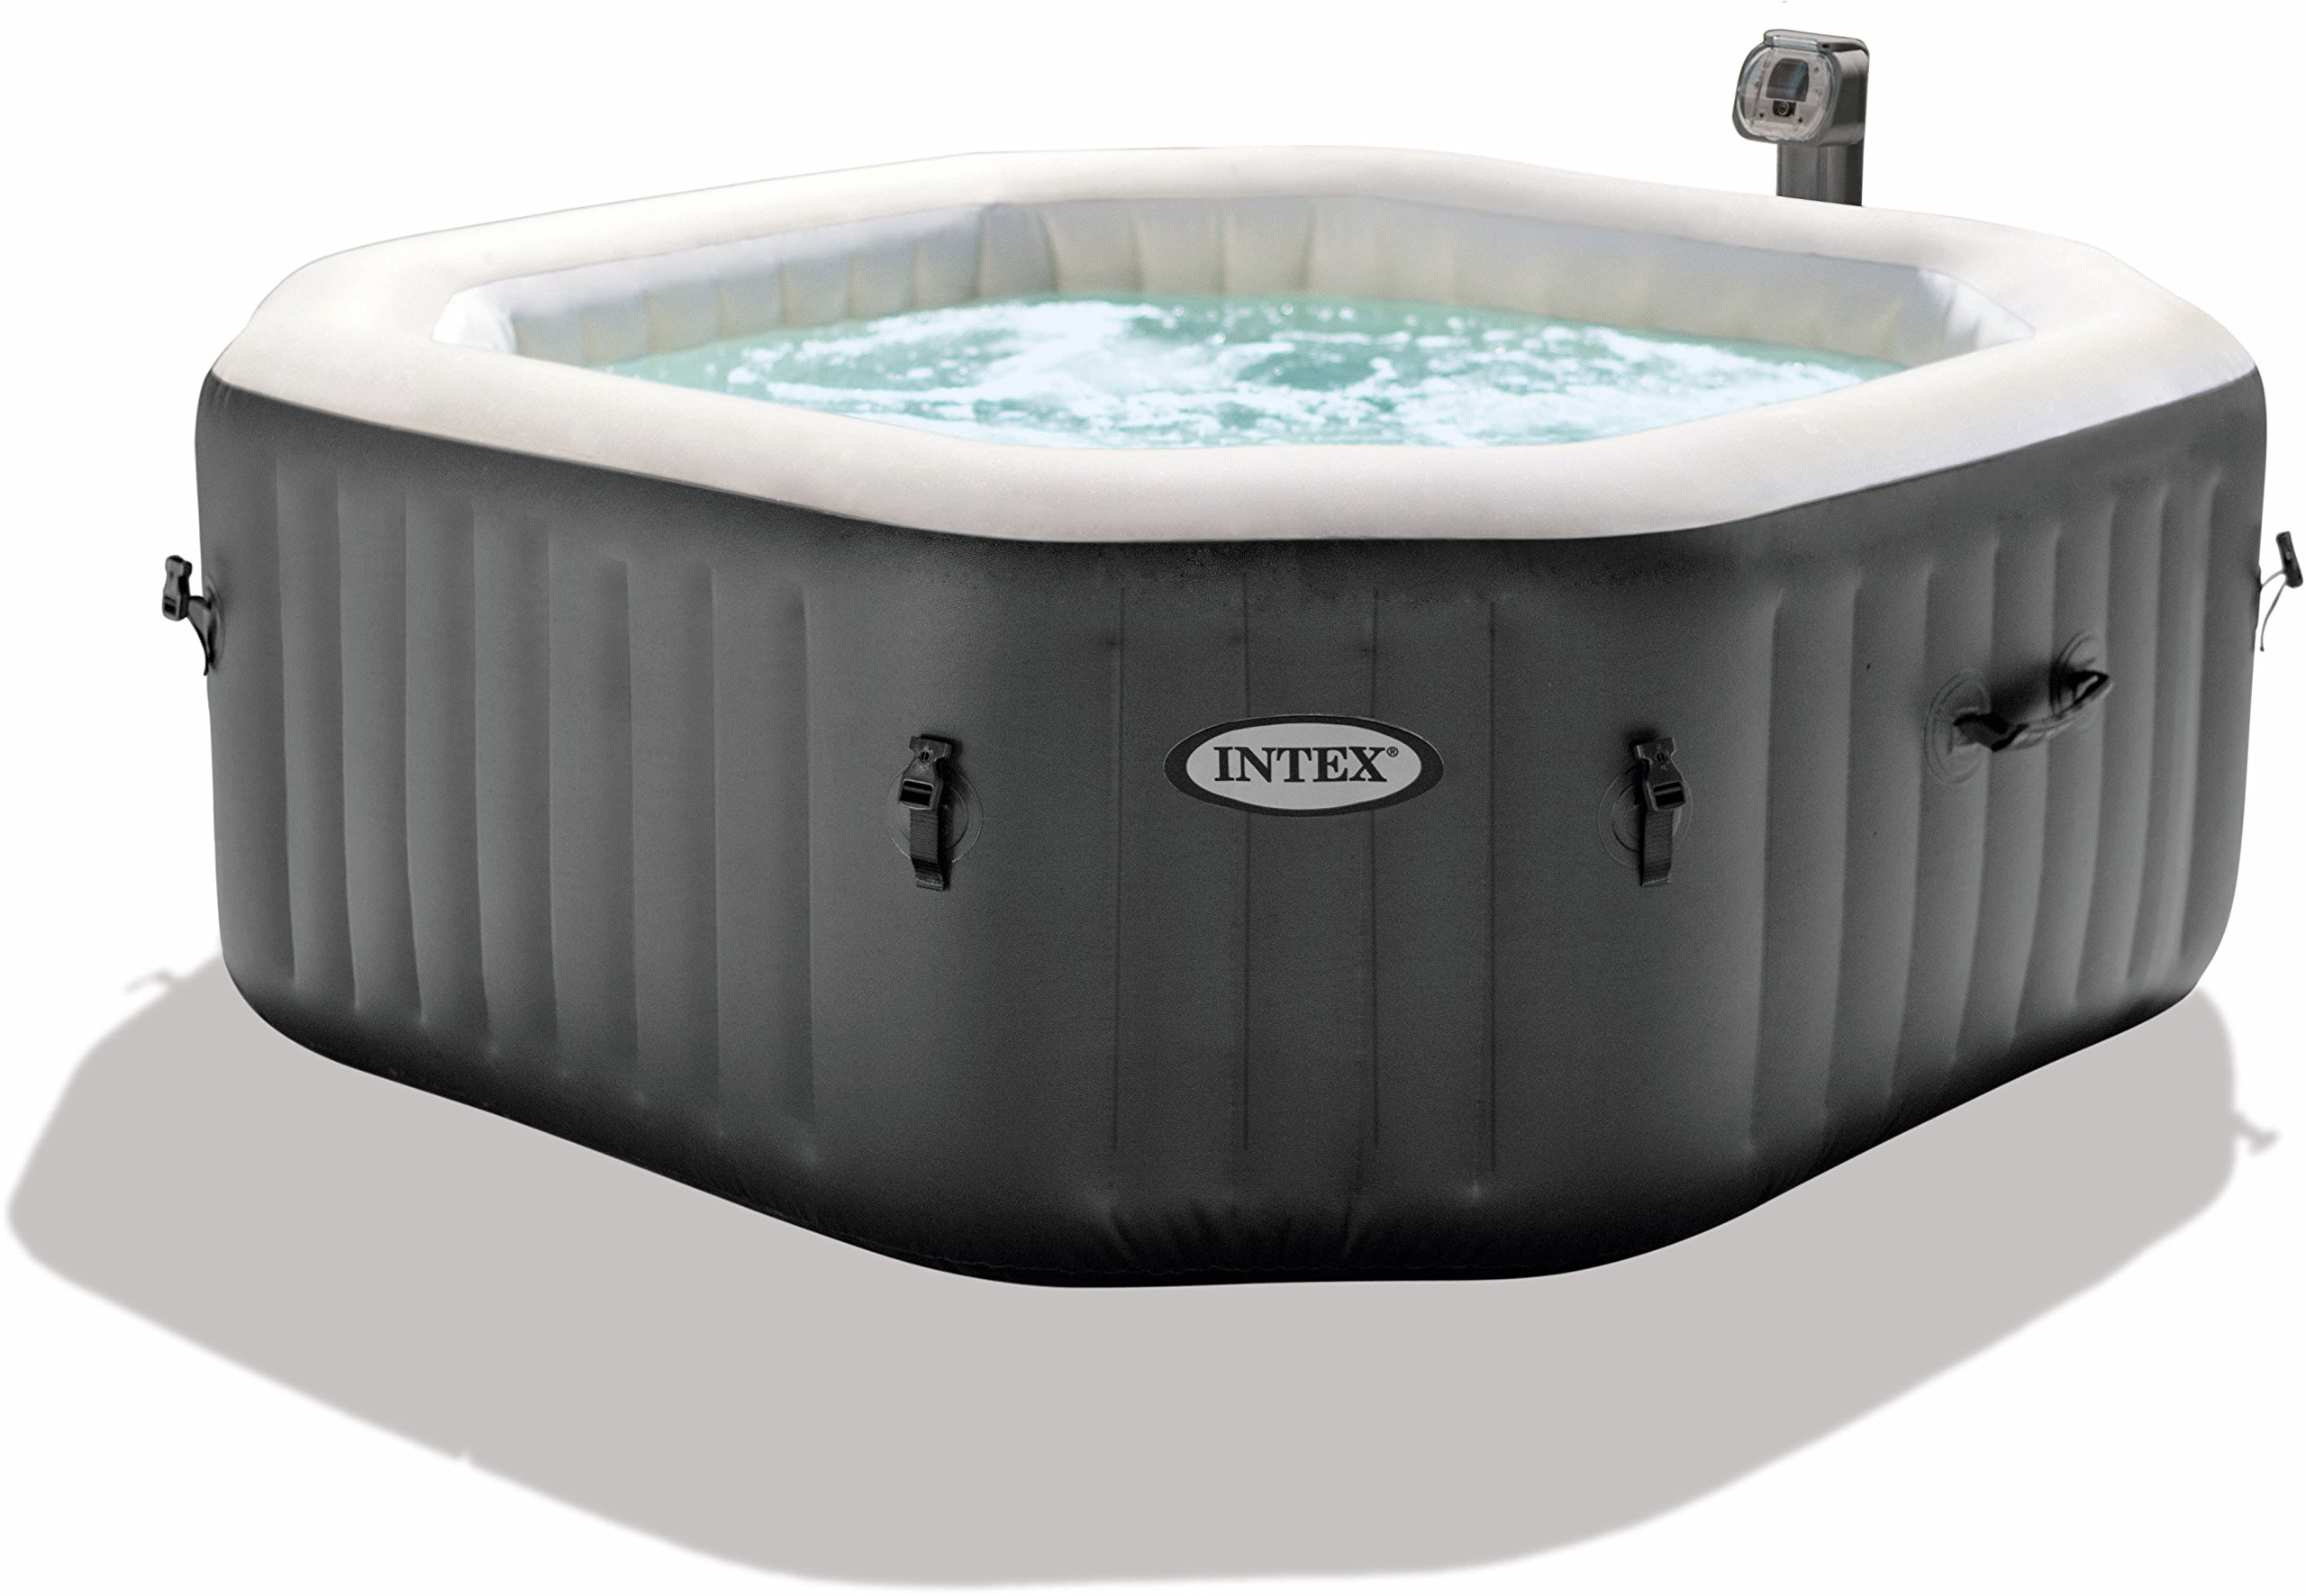 Best Inflatable Hot Tubs On The Market Reviewed | TechEffect